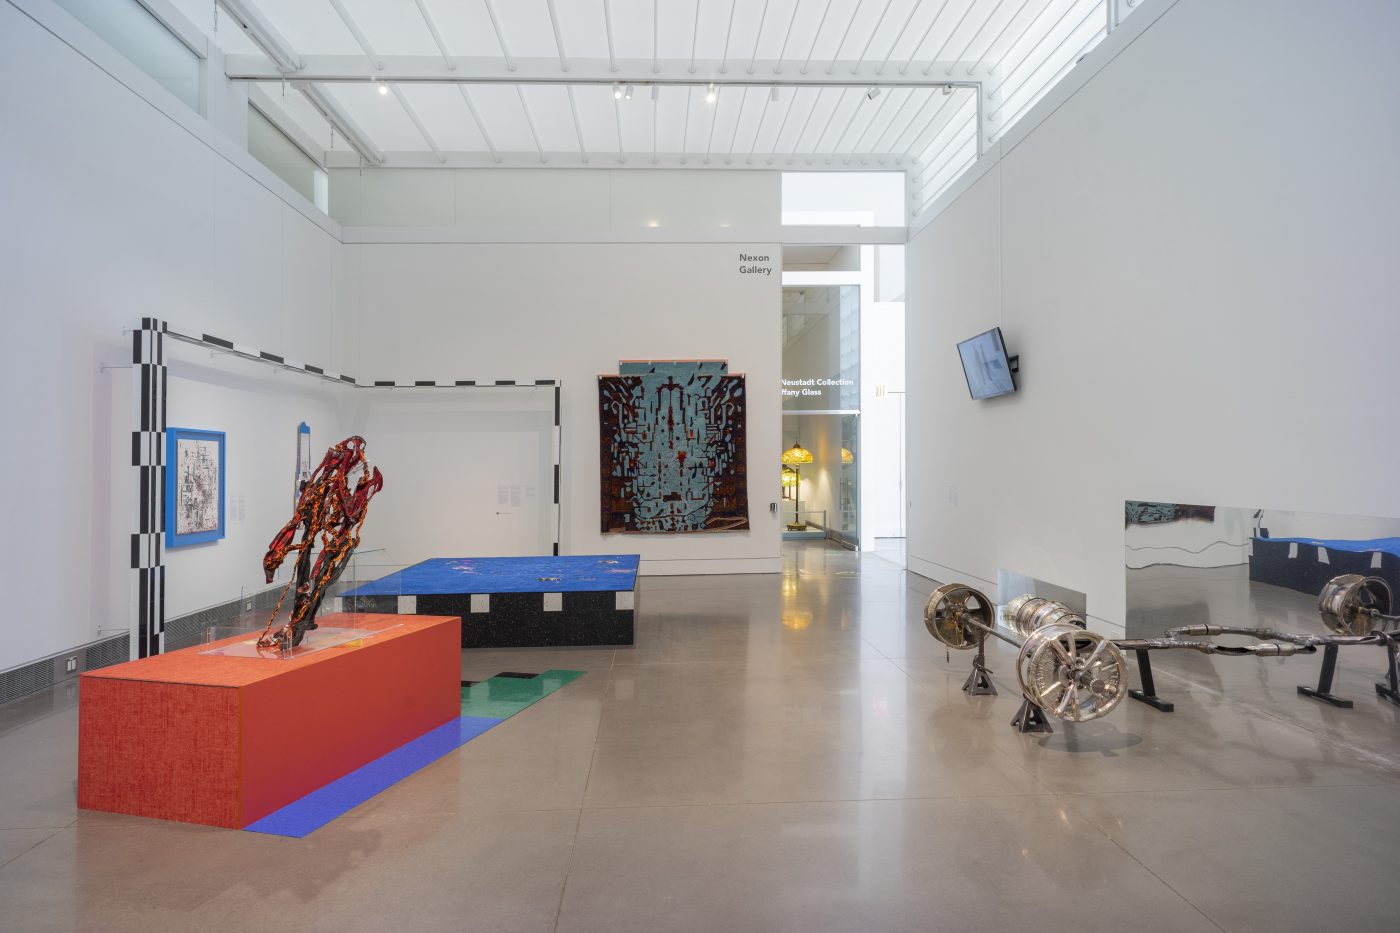 A wide installation view of Asif Main’s RAF: Prosthetic Location exhibition. To the right are three abstract compositions hanging on the walls. In front of the hanging pieces, are two large blocks, on the gallery floor. One is orange and one is black and blue. The orange block has an abstract orange sculpture on top of it. Framing the large blocks is a rectangular shaped beam with checkered black and white stripes. On the right hangs a flat screen, wall monitor and a propped up car axle on the floor.